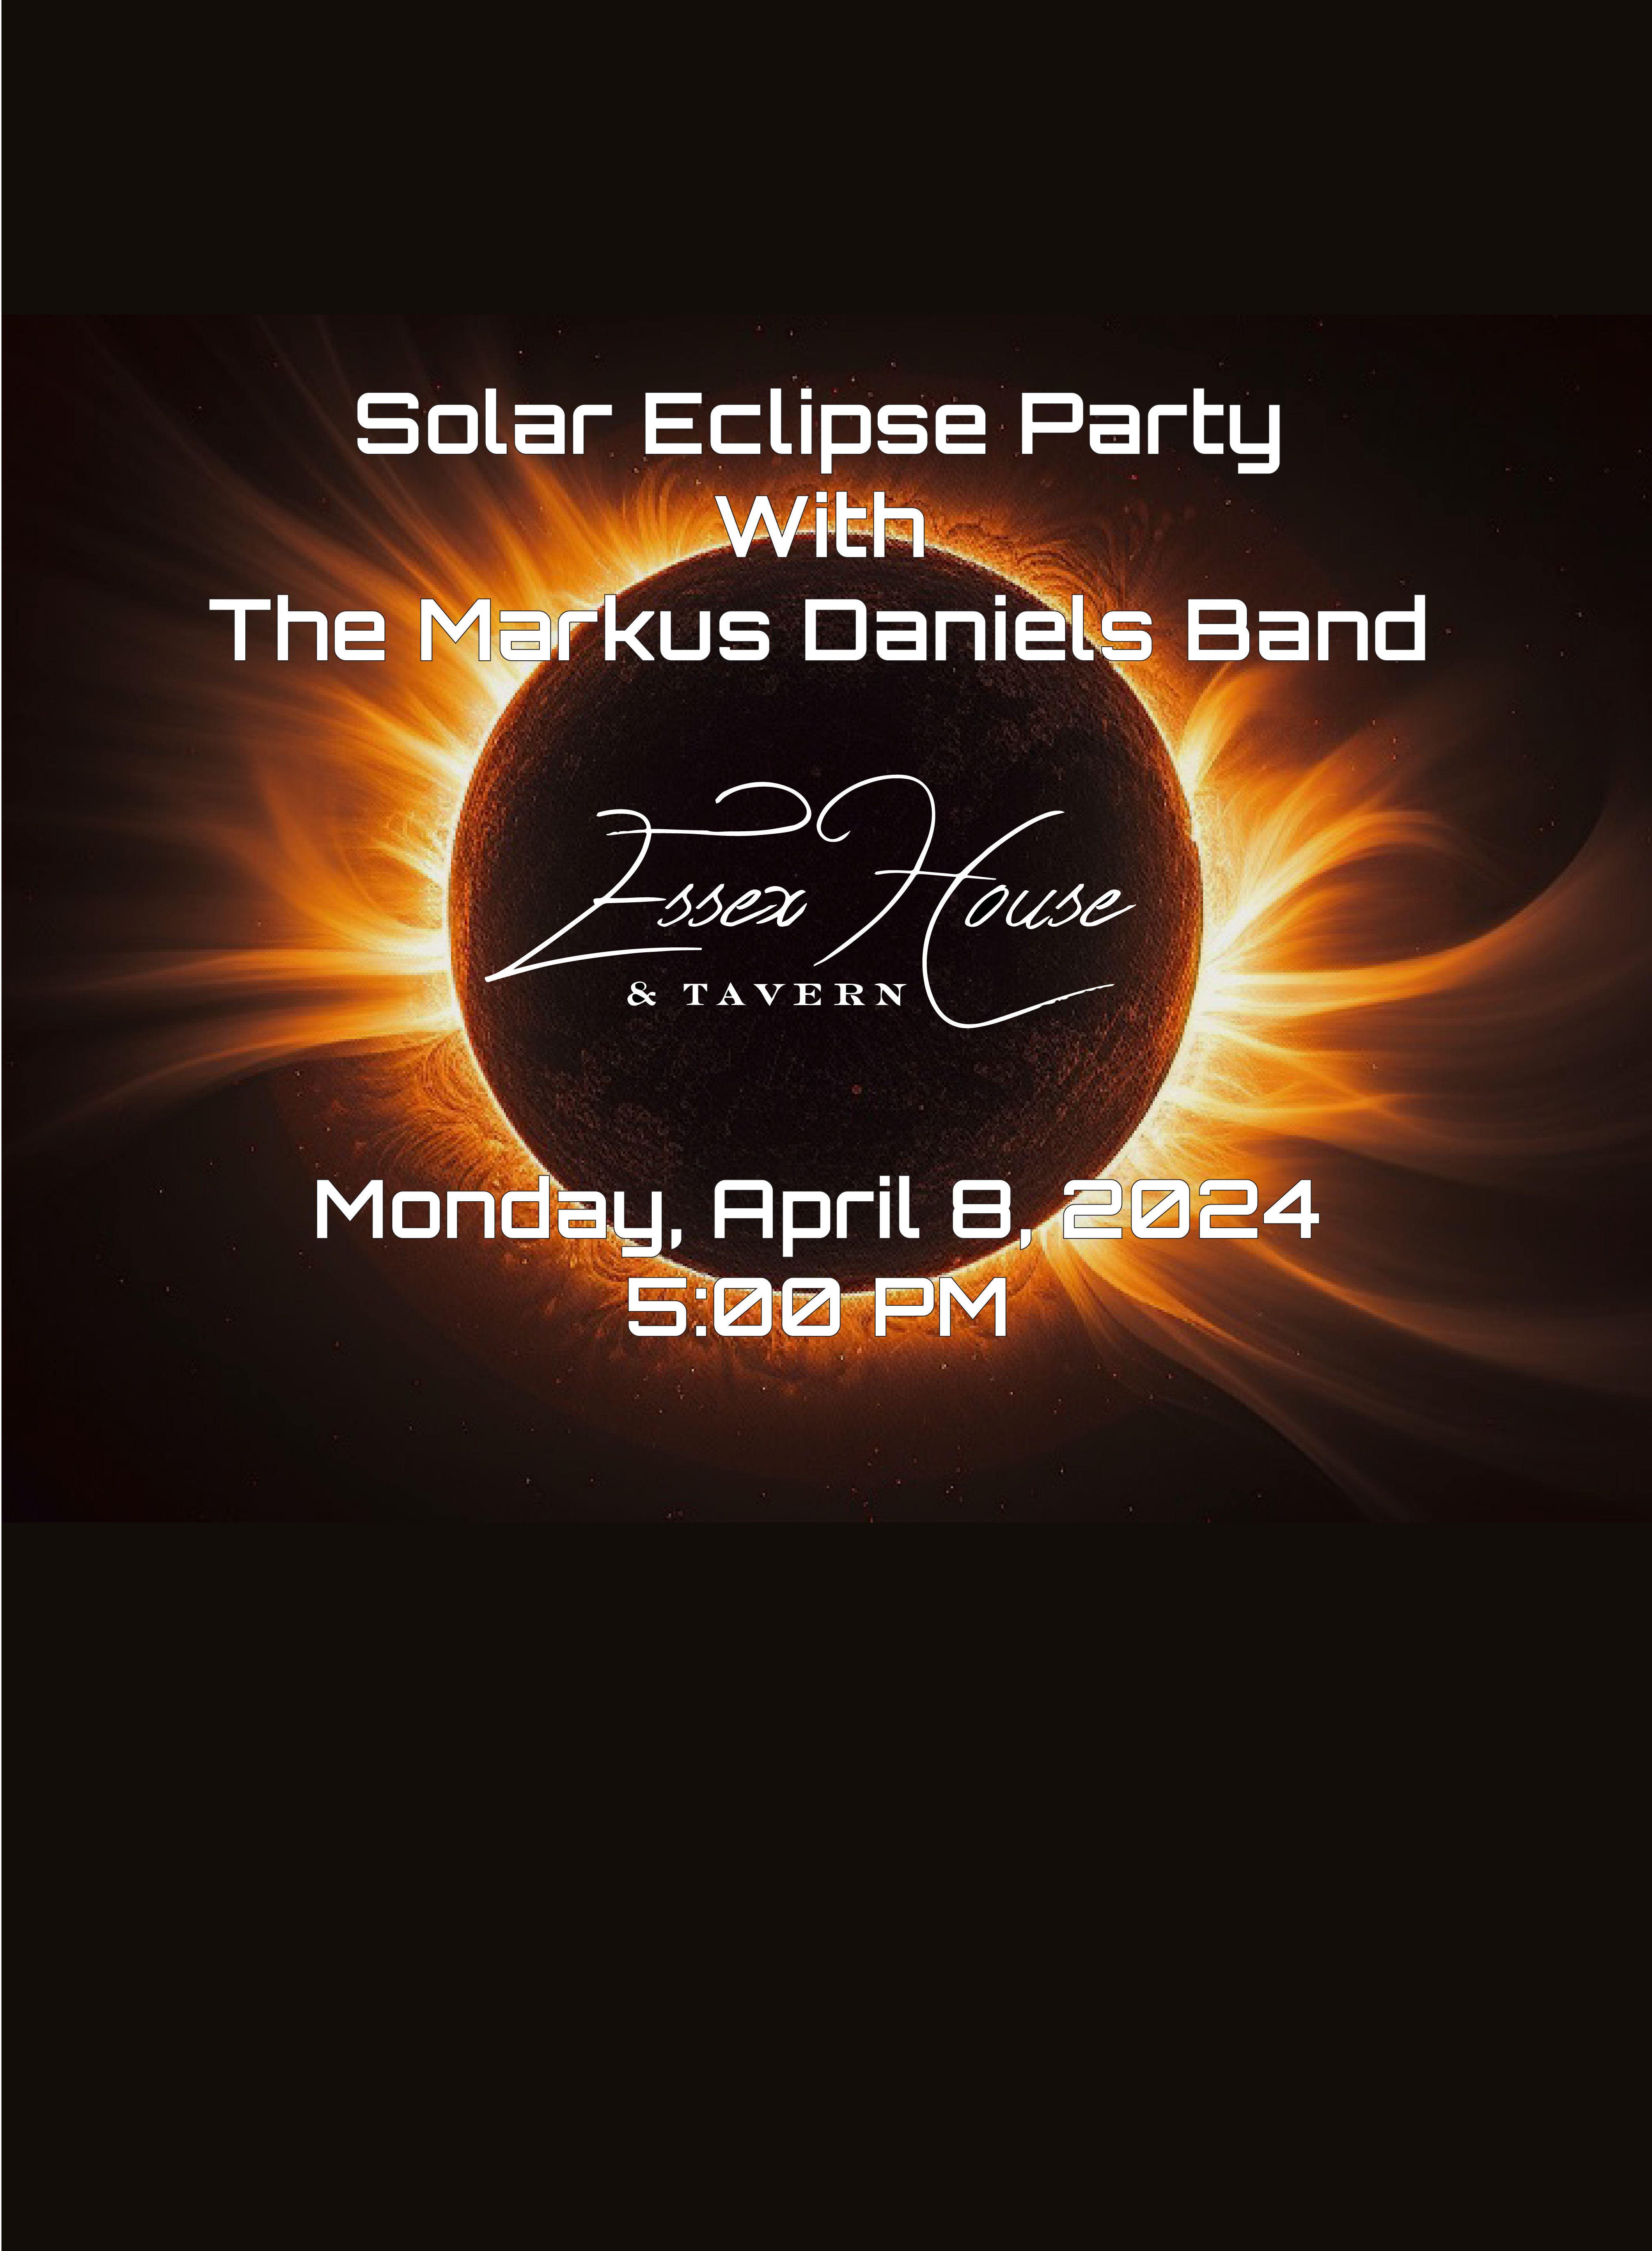 Solar Eclipse Party at the Essex House